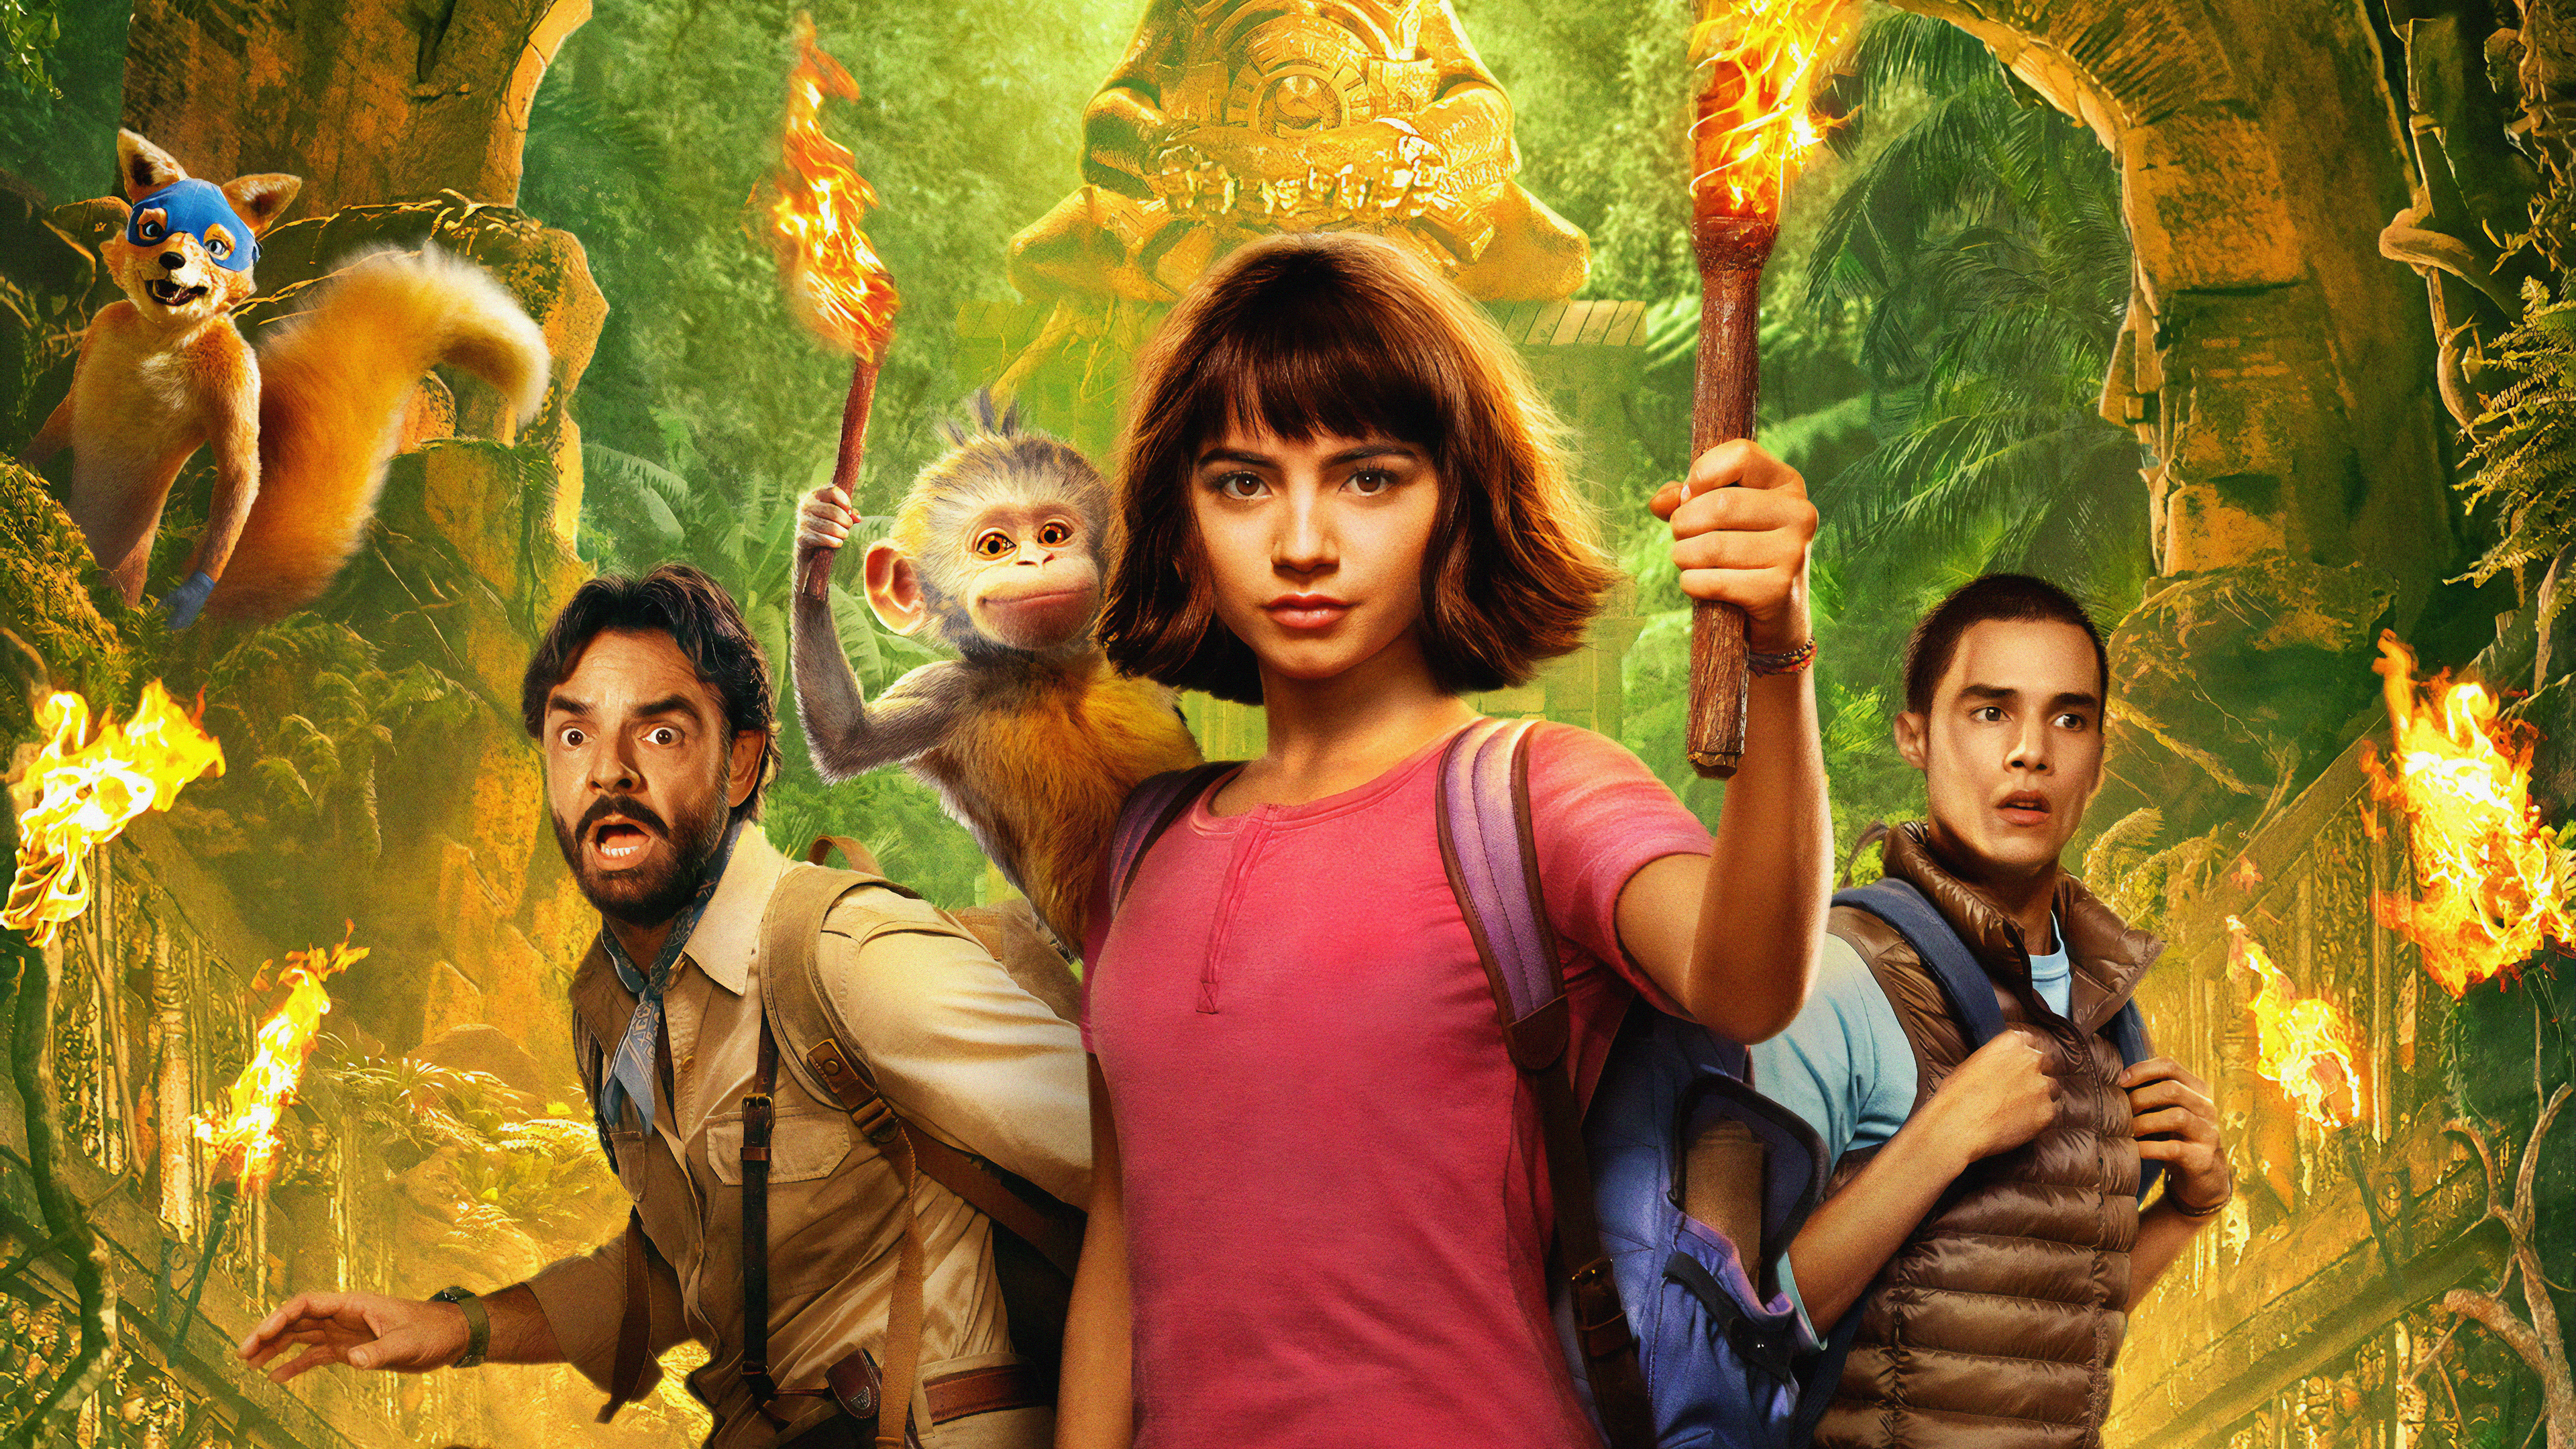 dora and the lost city of gold, movie, dora márquez, isabela merced